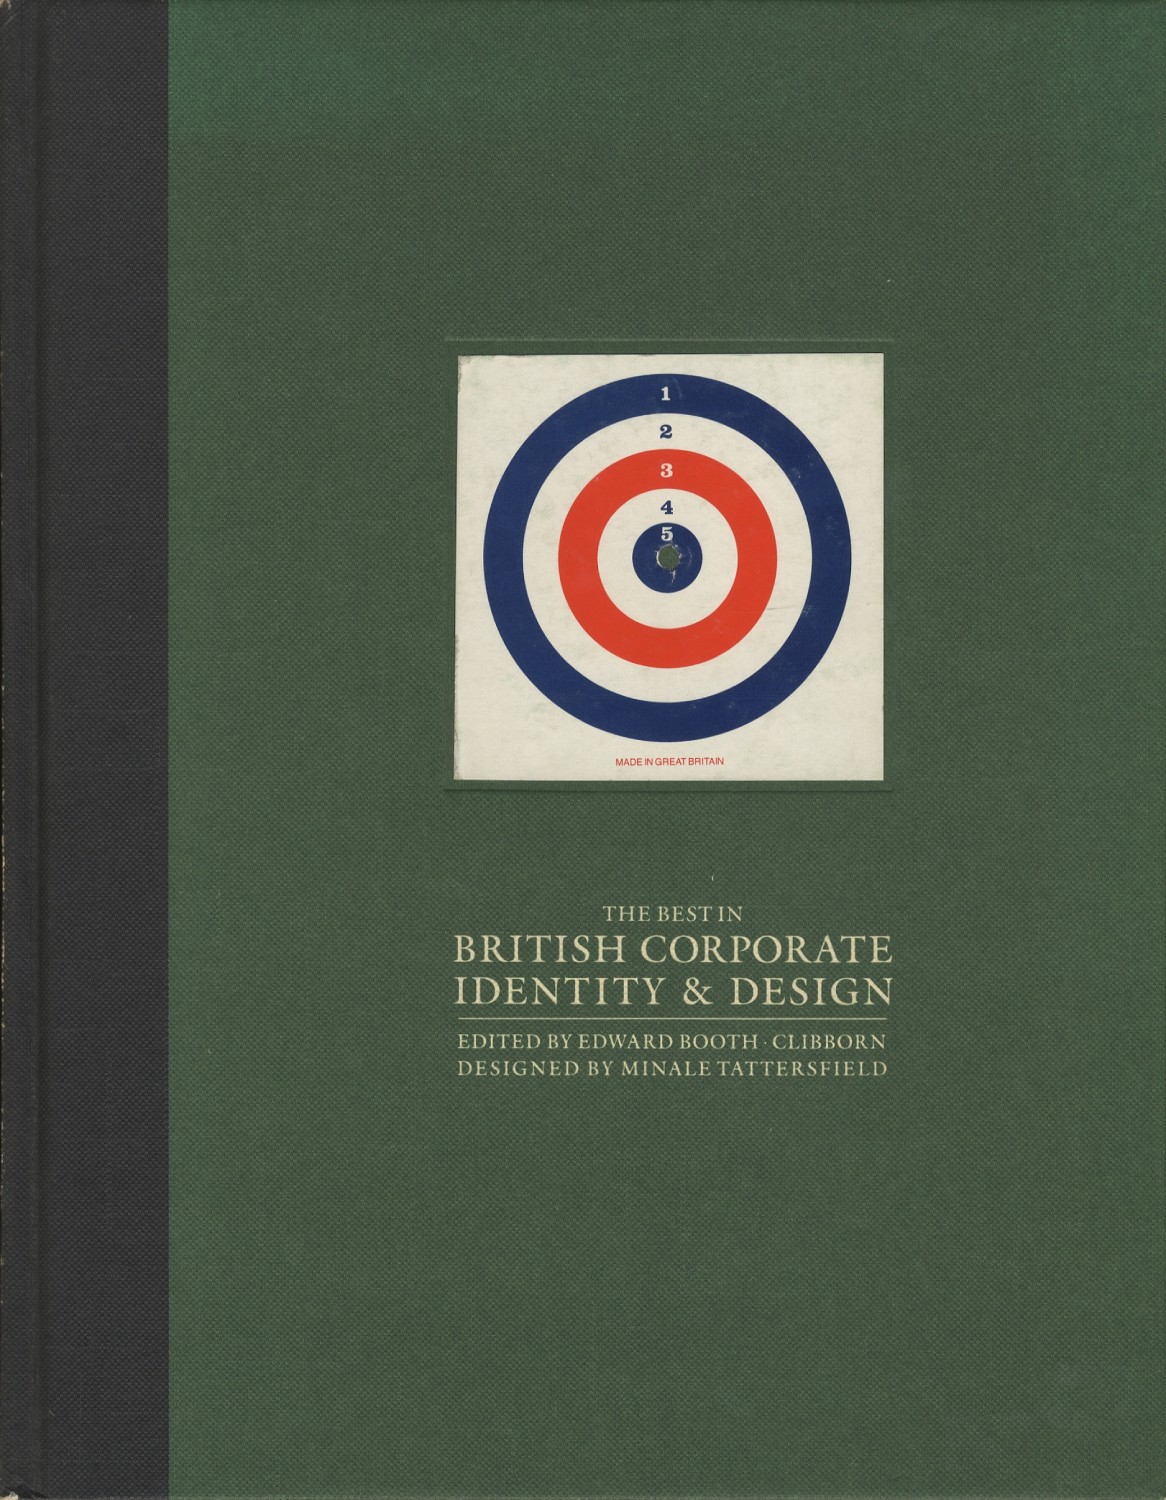 The Best in British Corporate Identity and Design